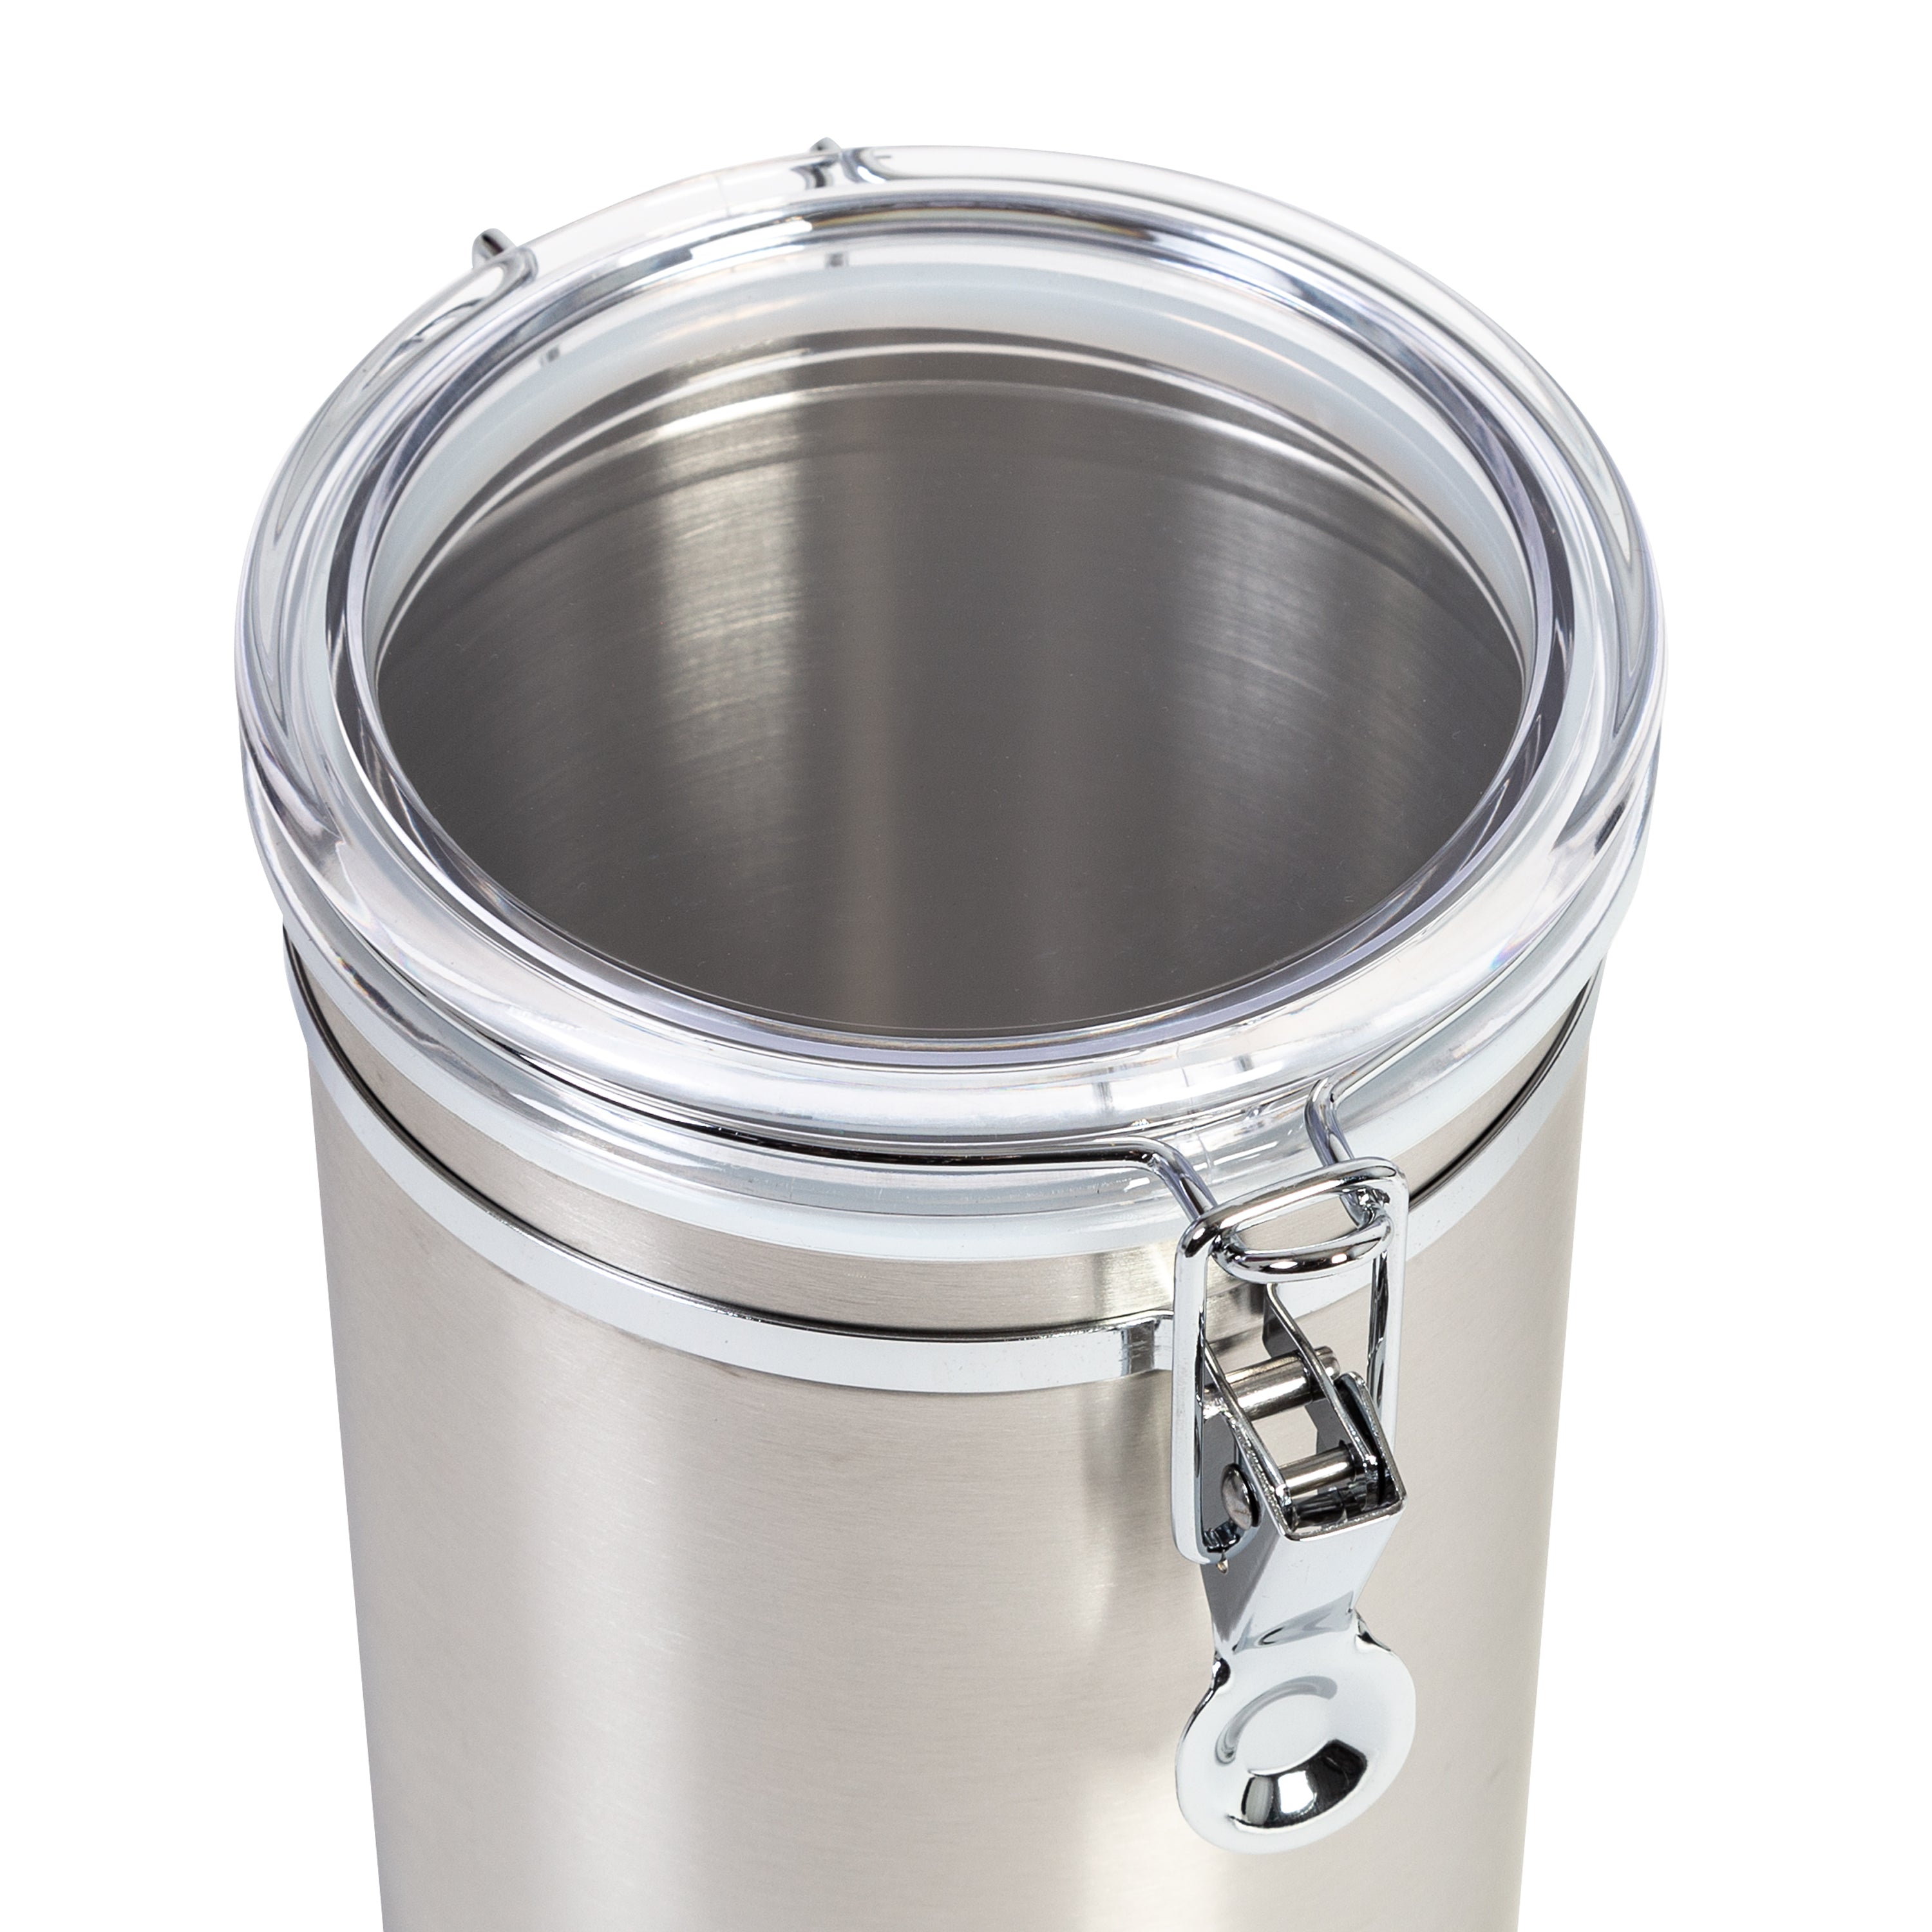 Stainless-Steel Canisters